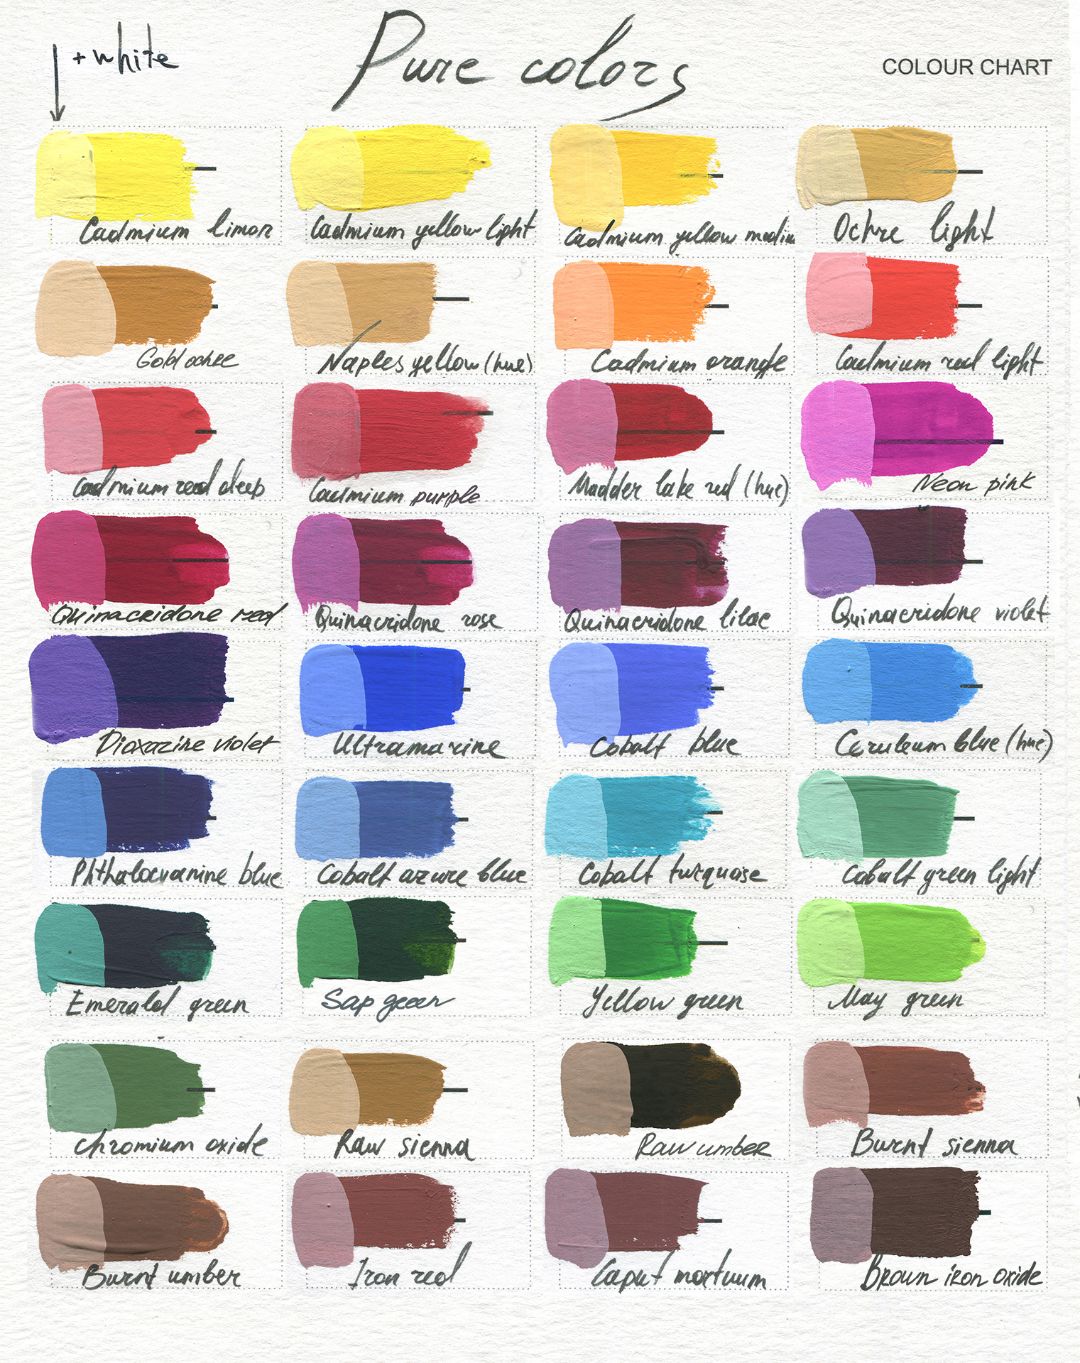 How to Make a Color Mixing Chart - Color Mixing Guide for Artists